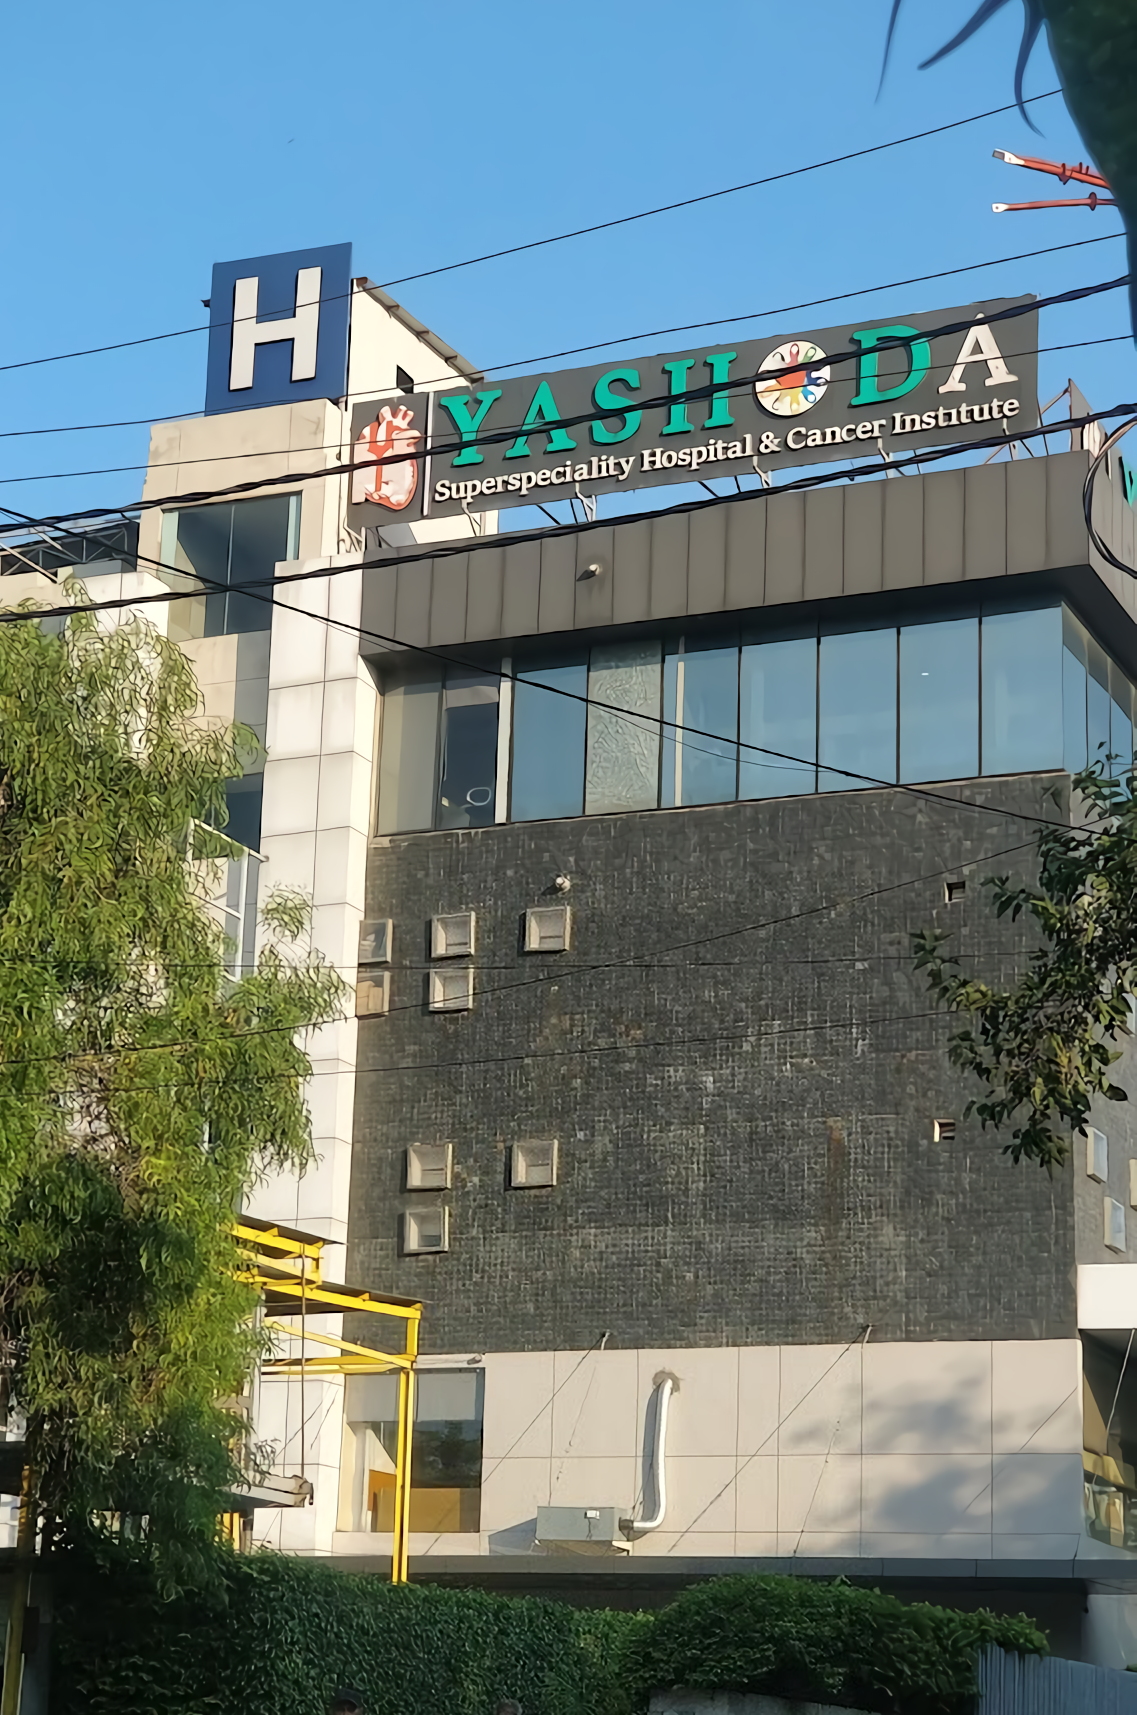 Yashoda Superspeciality Hospital And Cancer Institute